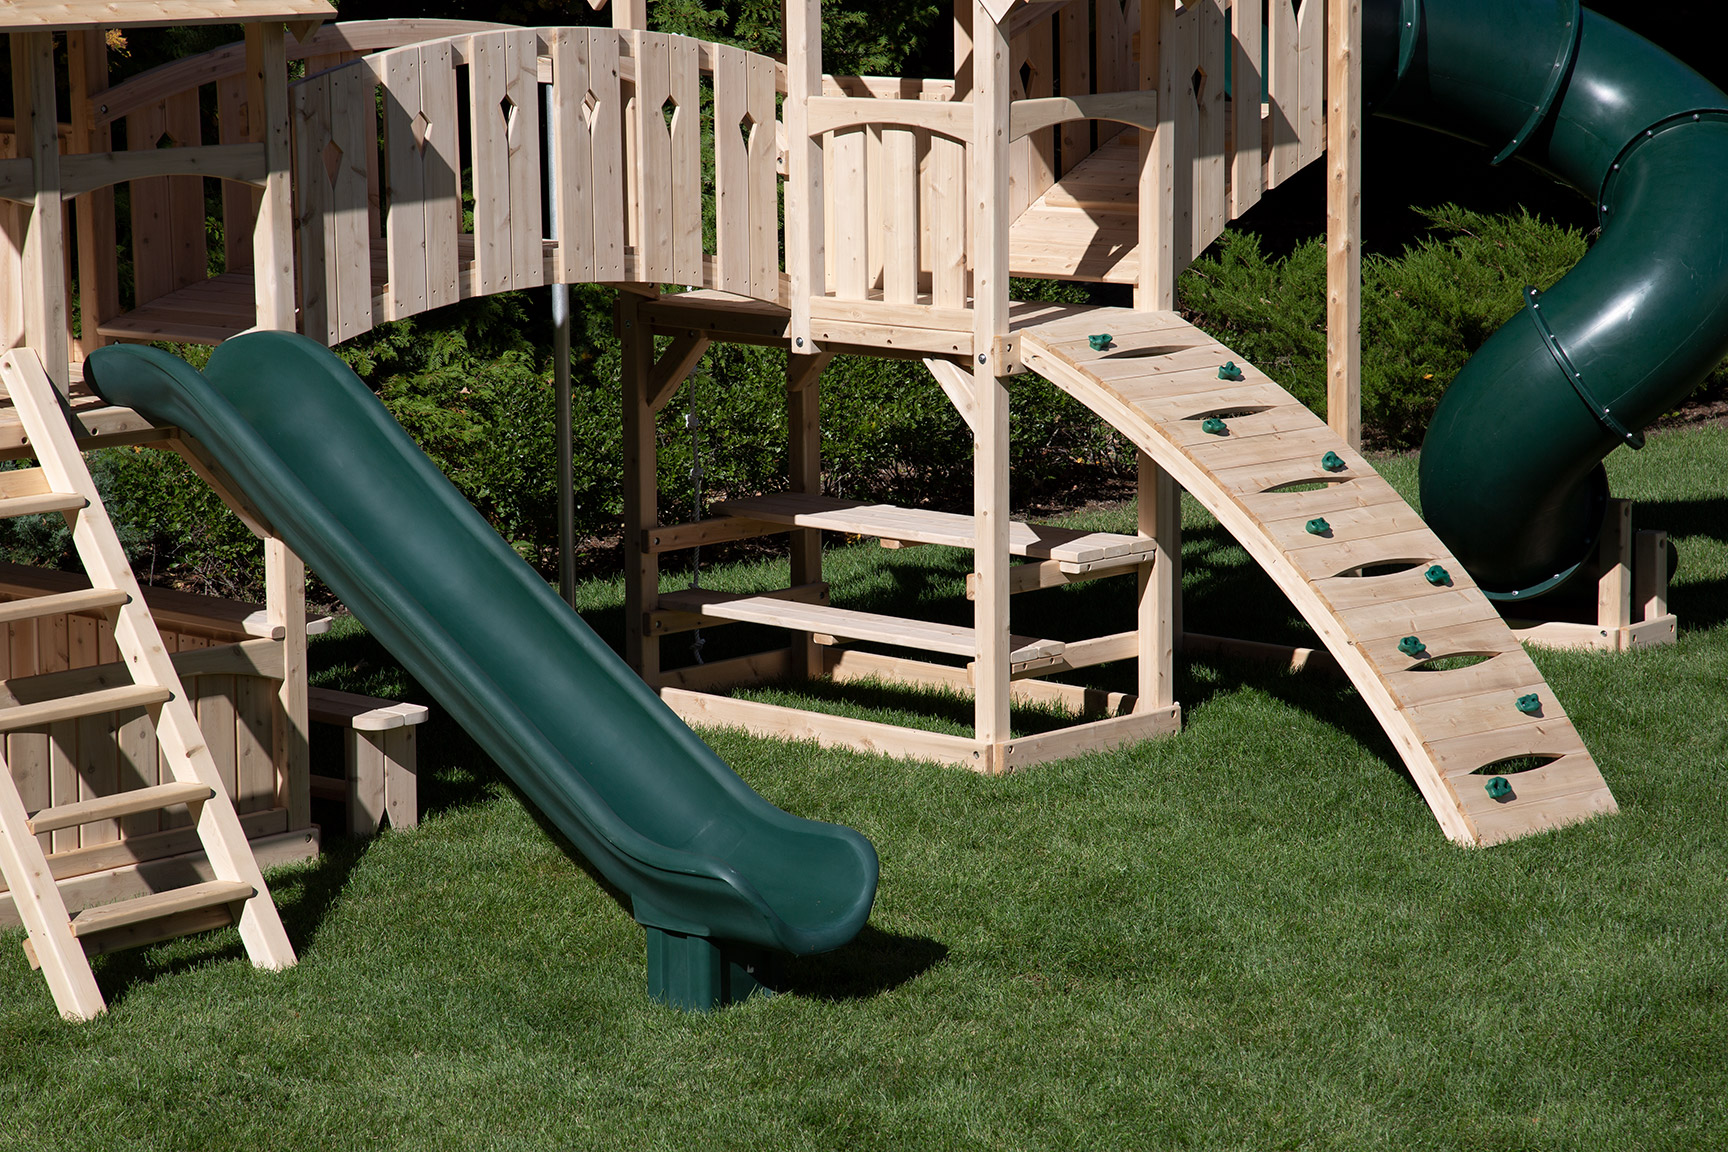 Triumph Play System's diamond tower and green tube slide.